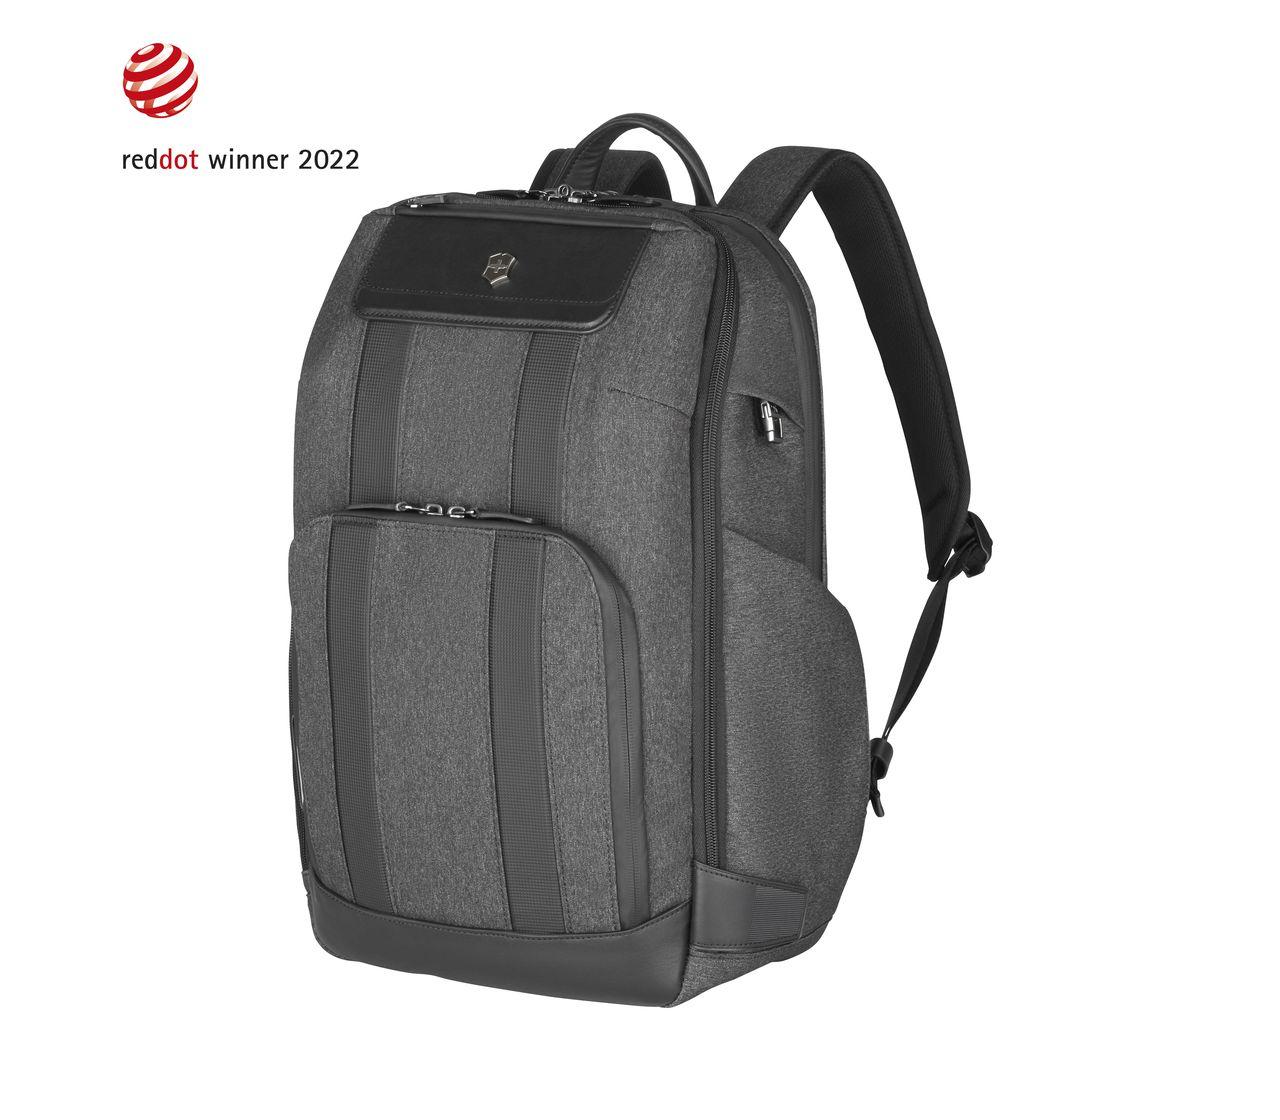 Victorinox Architecture Urban2 Deluxe Backpack in Grey / Black - 611954